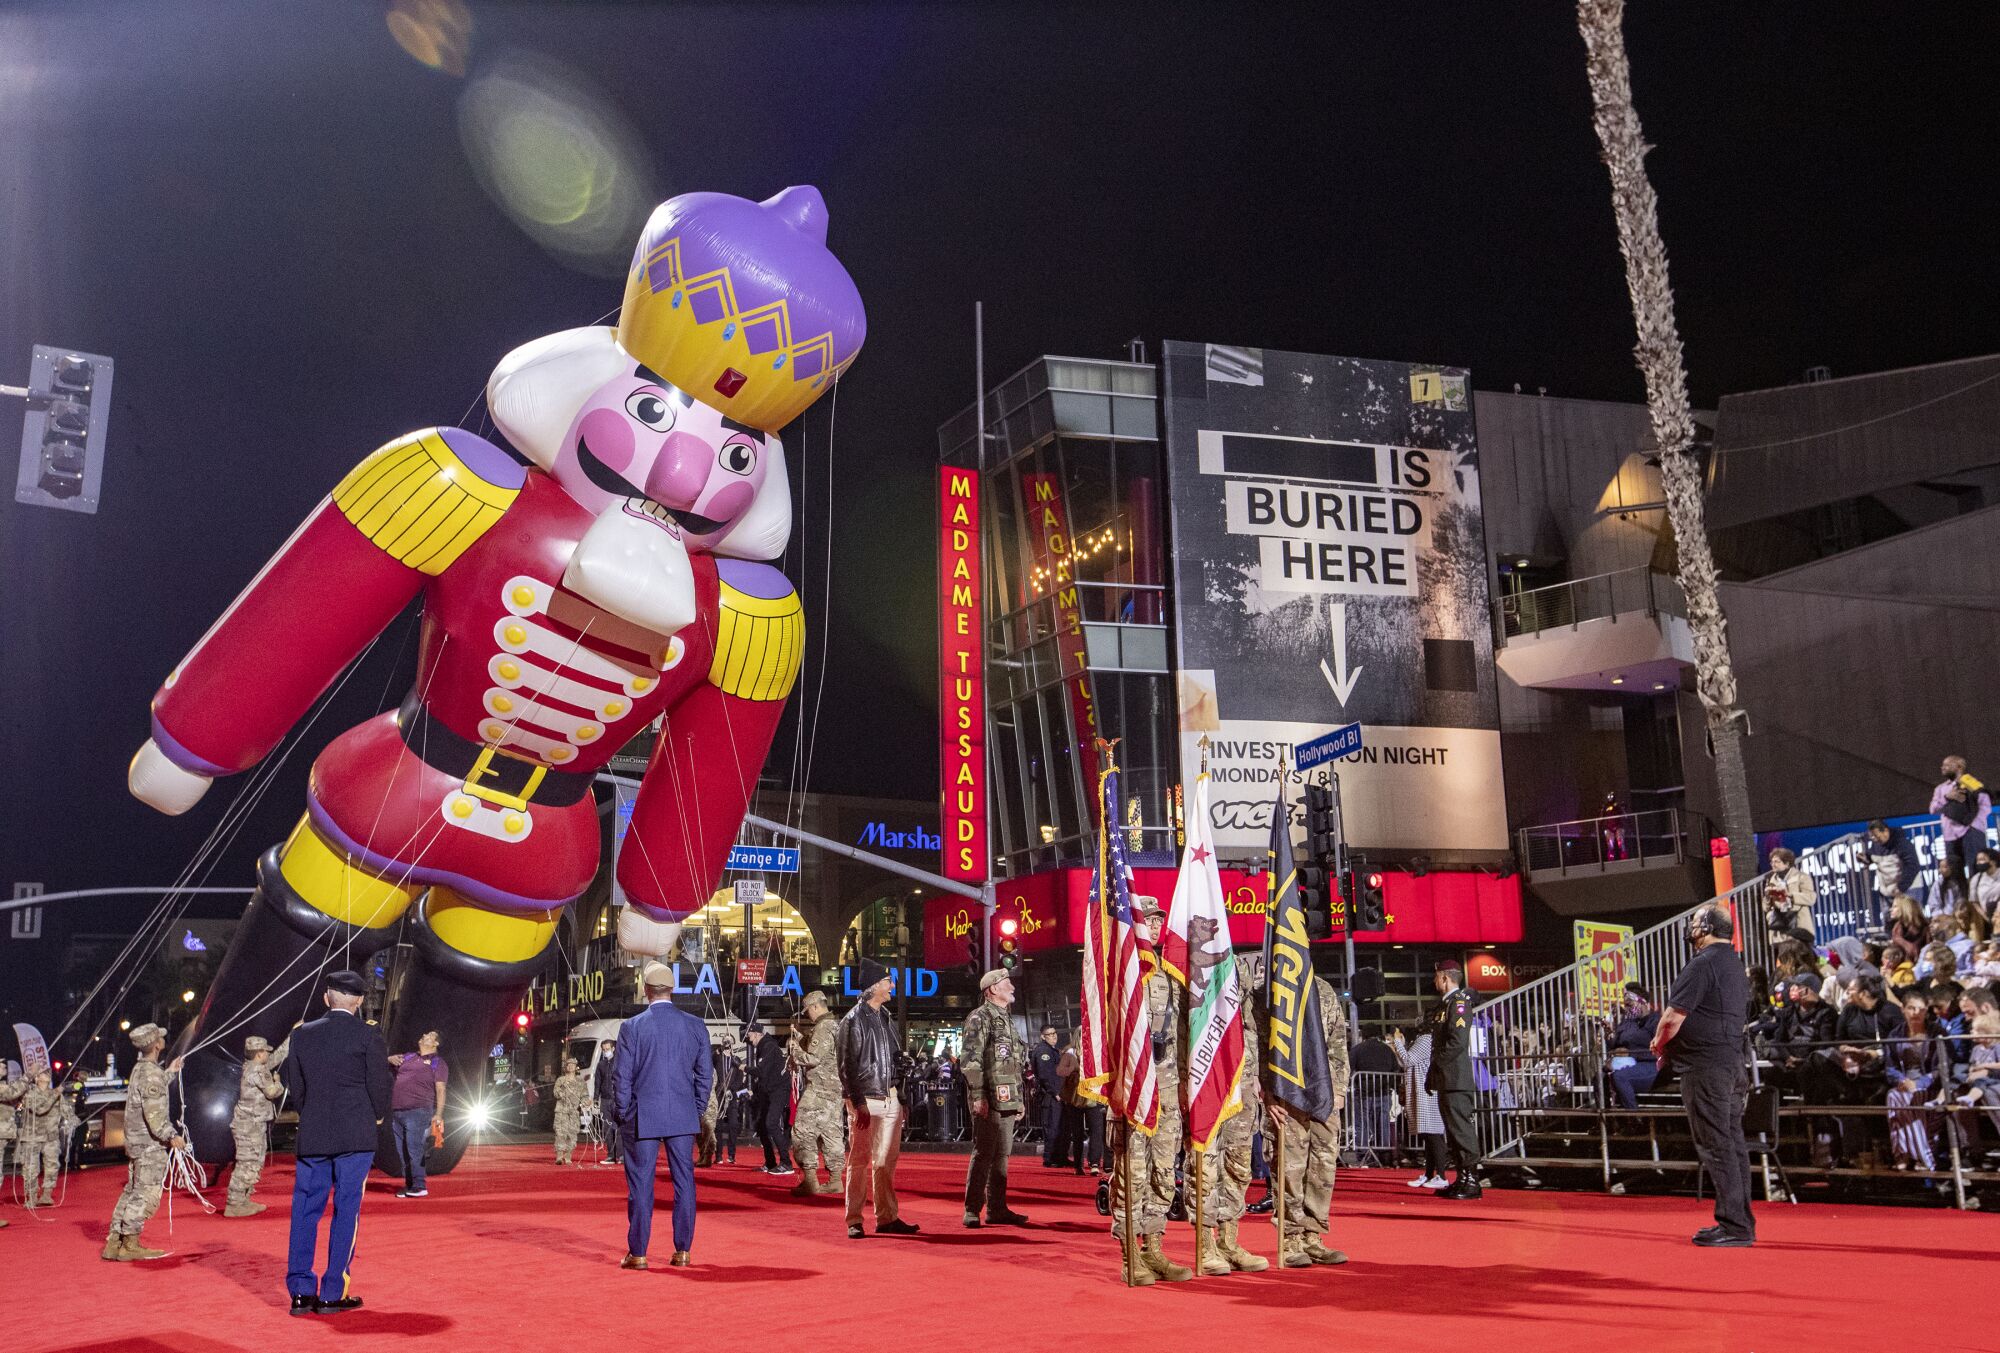 Army Rangers set up a four-story "Nutcracker" parade float on the red carpet